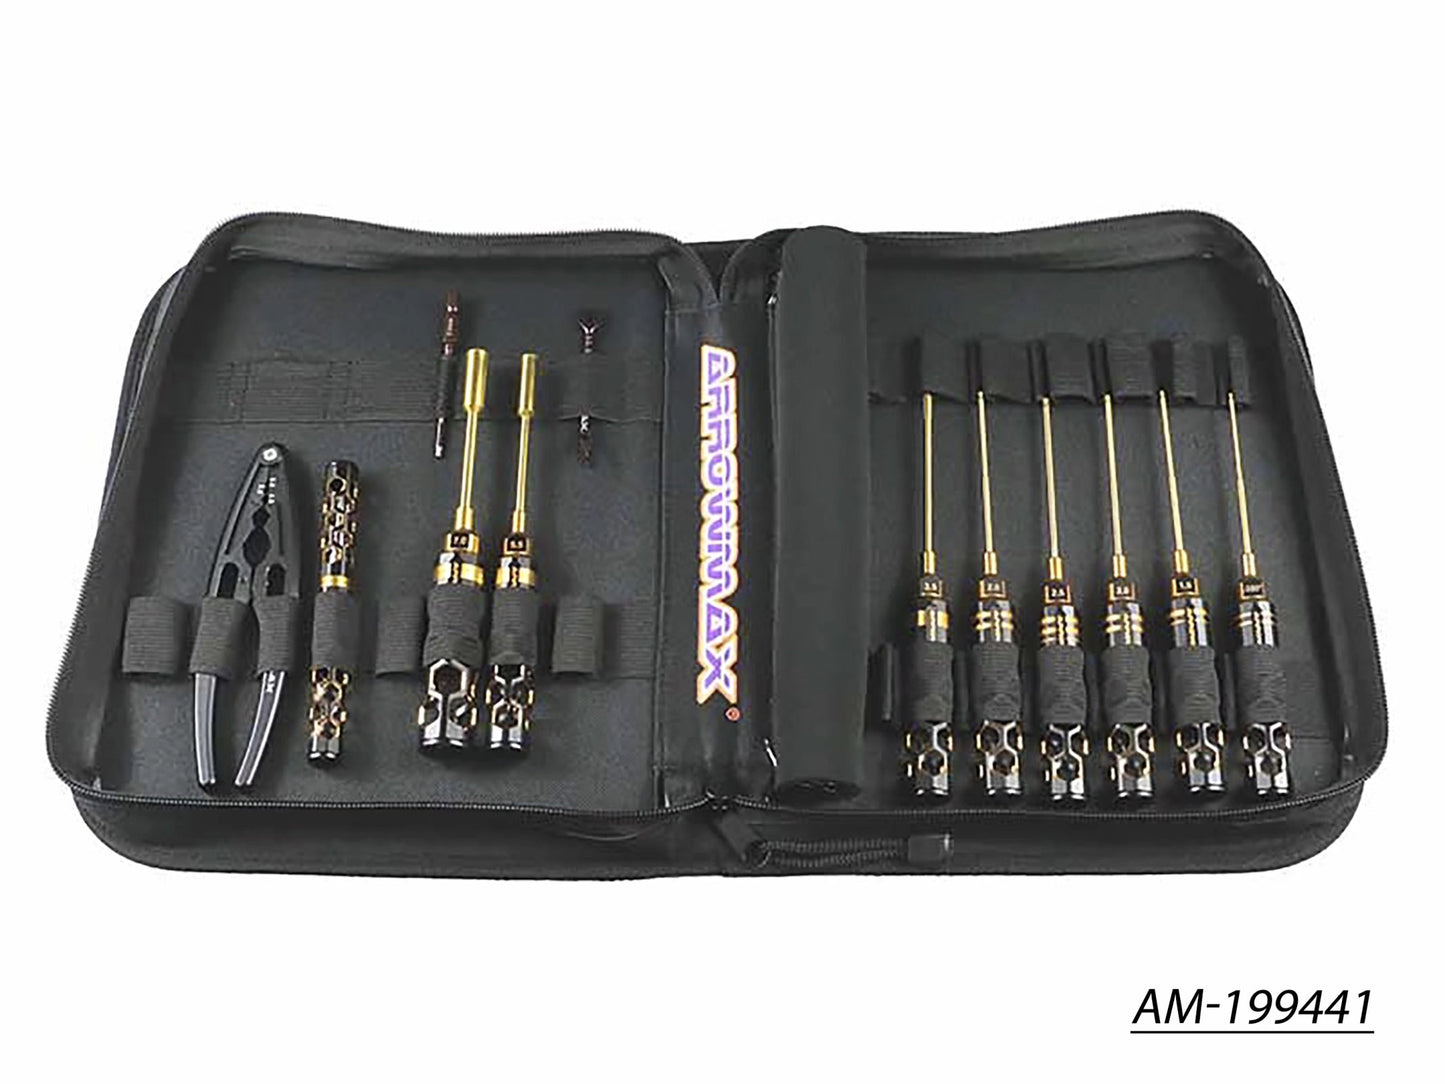 AM Toolset For 1/10 Offroad (12Pcs) With Tools Bag Black Golden (AM-199441)